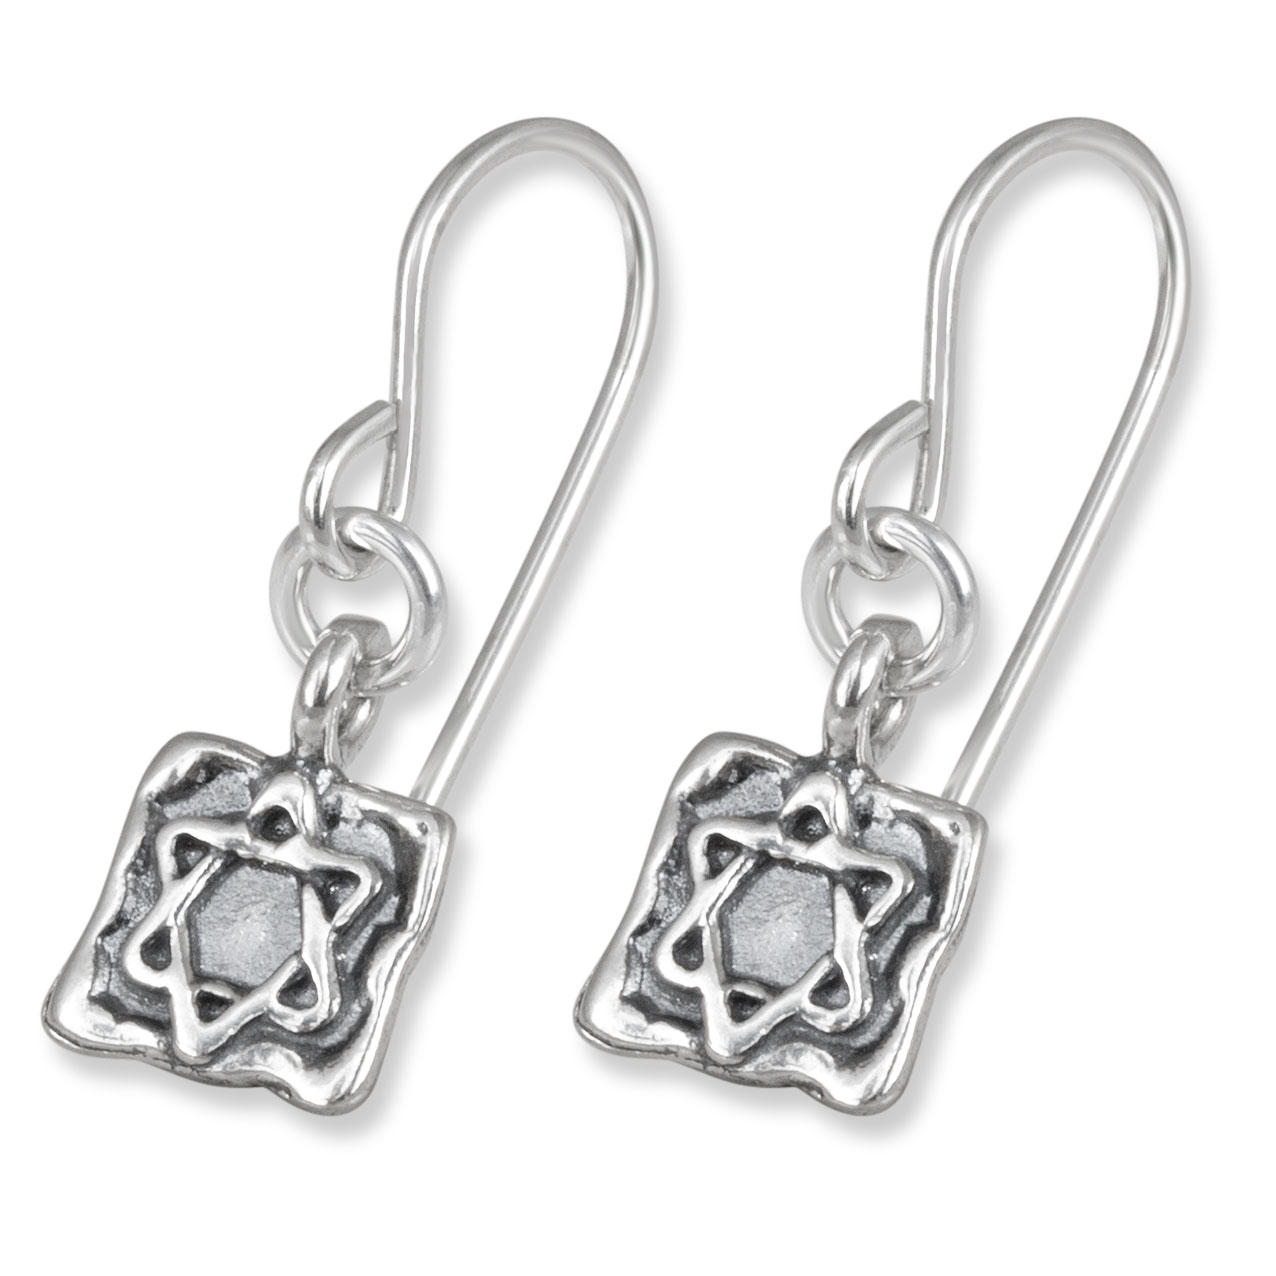  Sterling Silver Square Star of David Earrings - 1